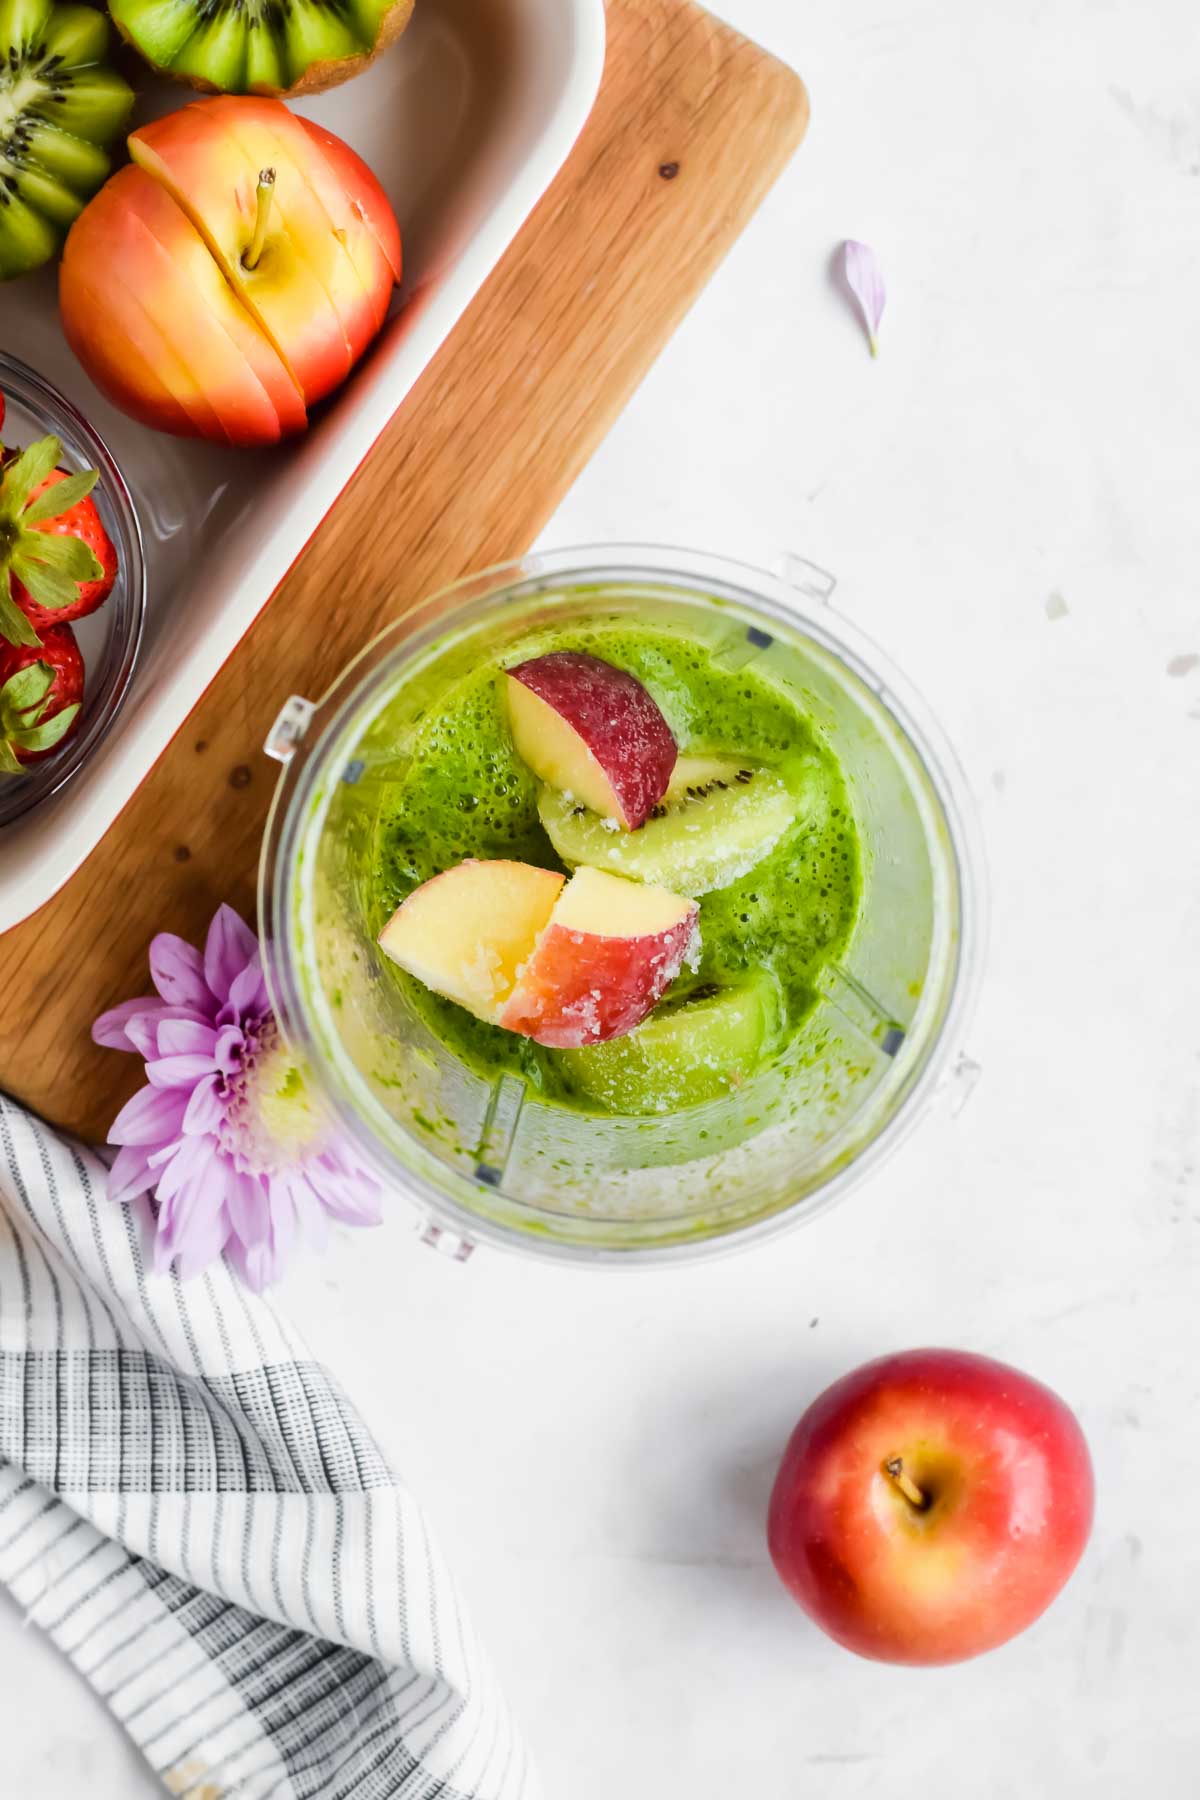 Ingredients for Apple Kiwi Green Smoothie in a blender cup.